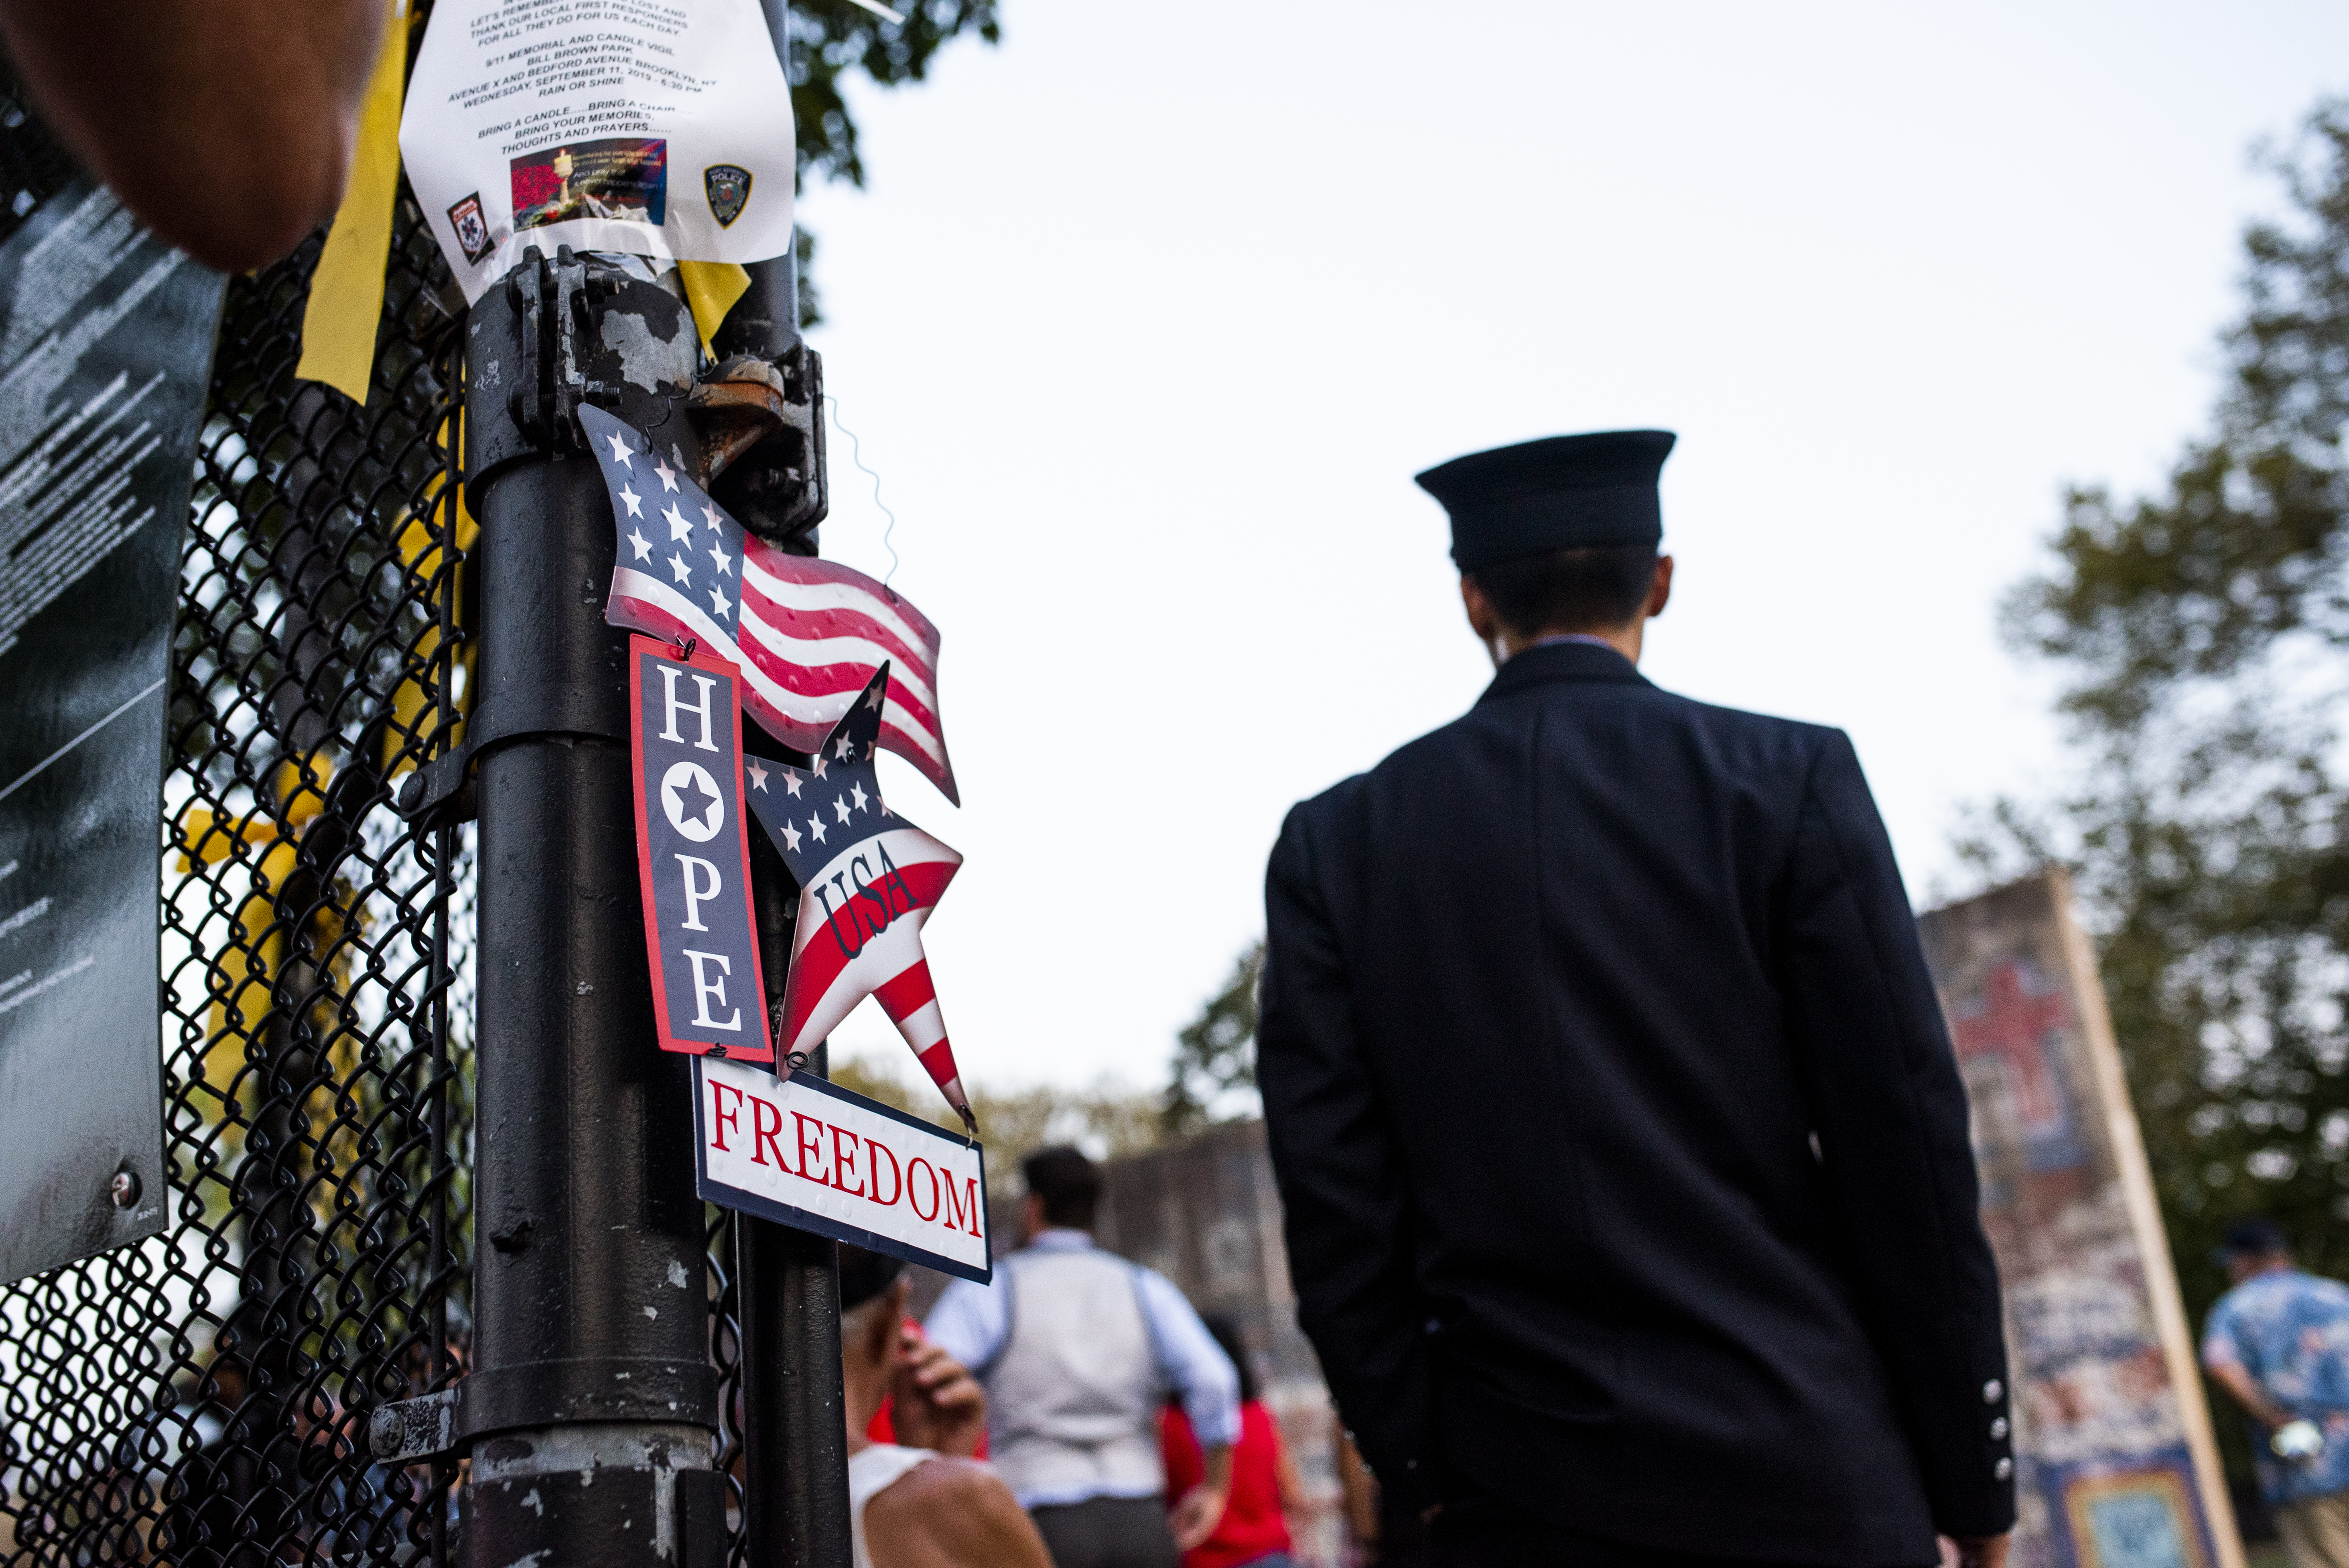 A firefighter heads for the handball court where Sheepshead Bay’s 9/11 memorial is held. Eagle photo by Mark Davis